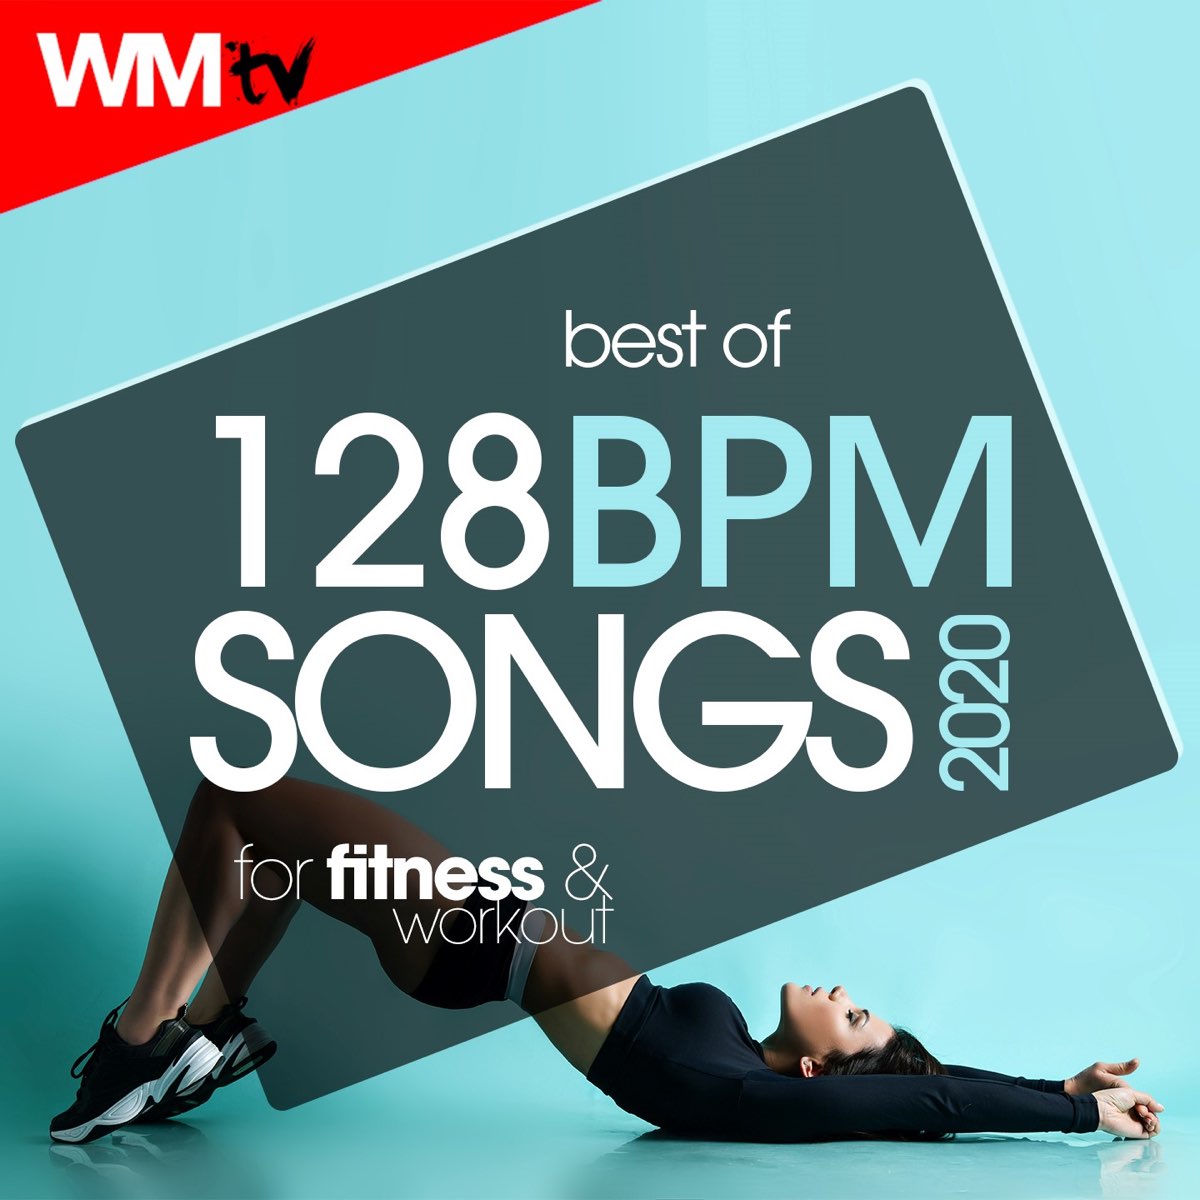 ‎best Of 128 Bpm Songs 2020 For Fitness And Workout 40 Unmixed Compilation For Fitness And Workout 8875